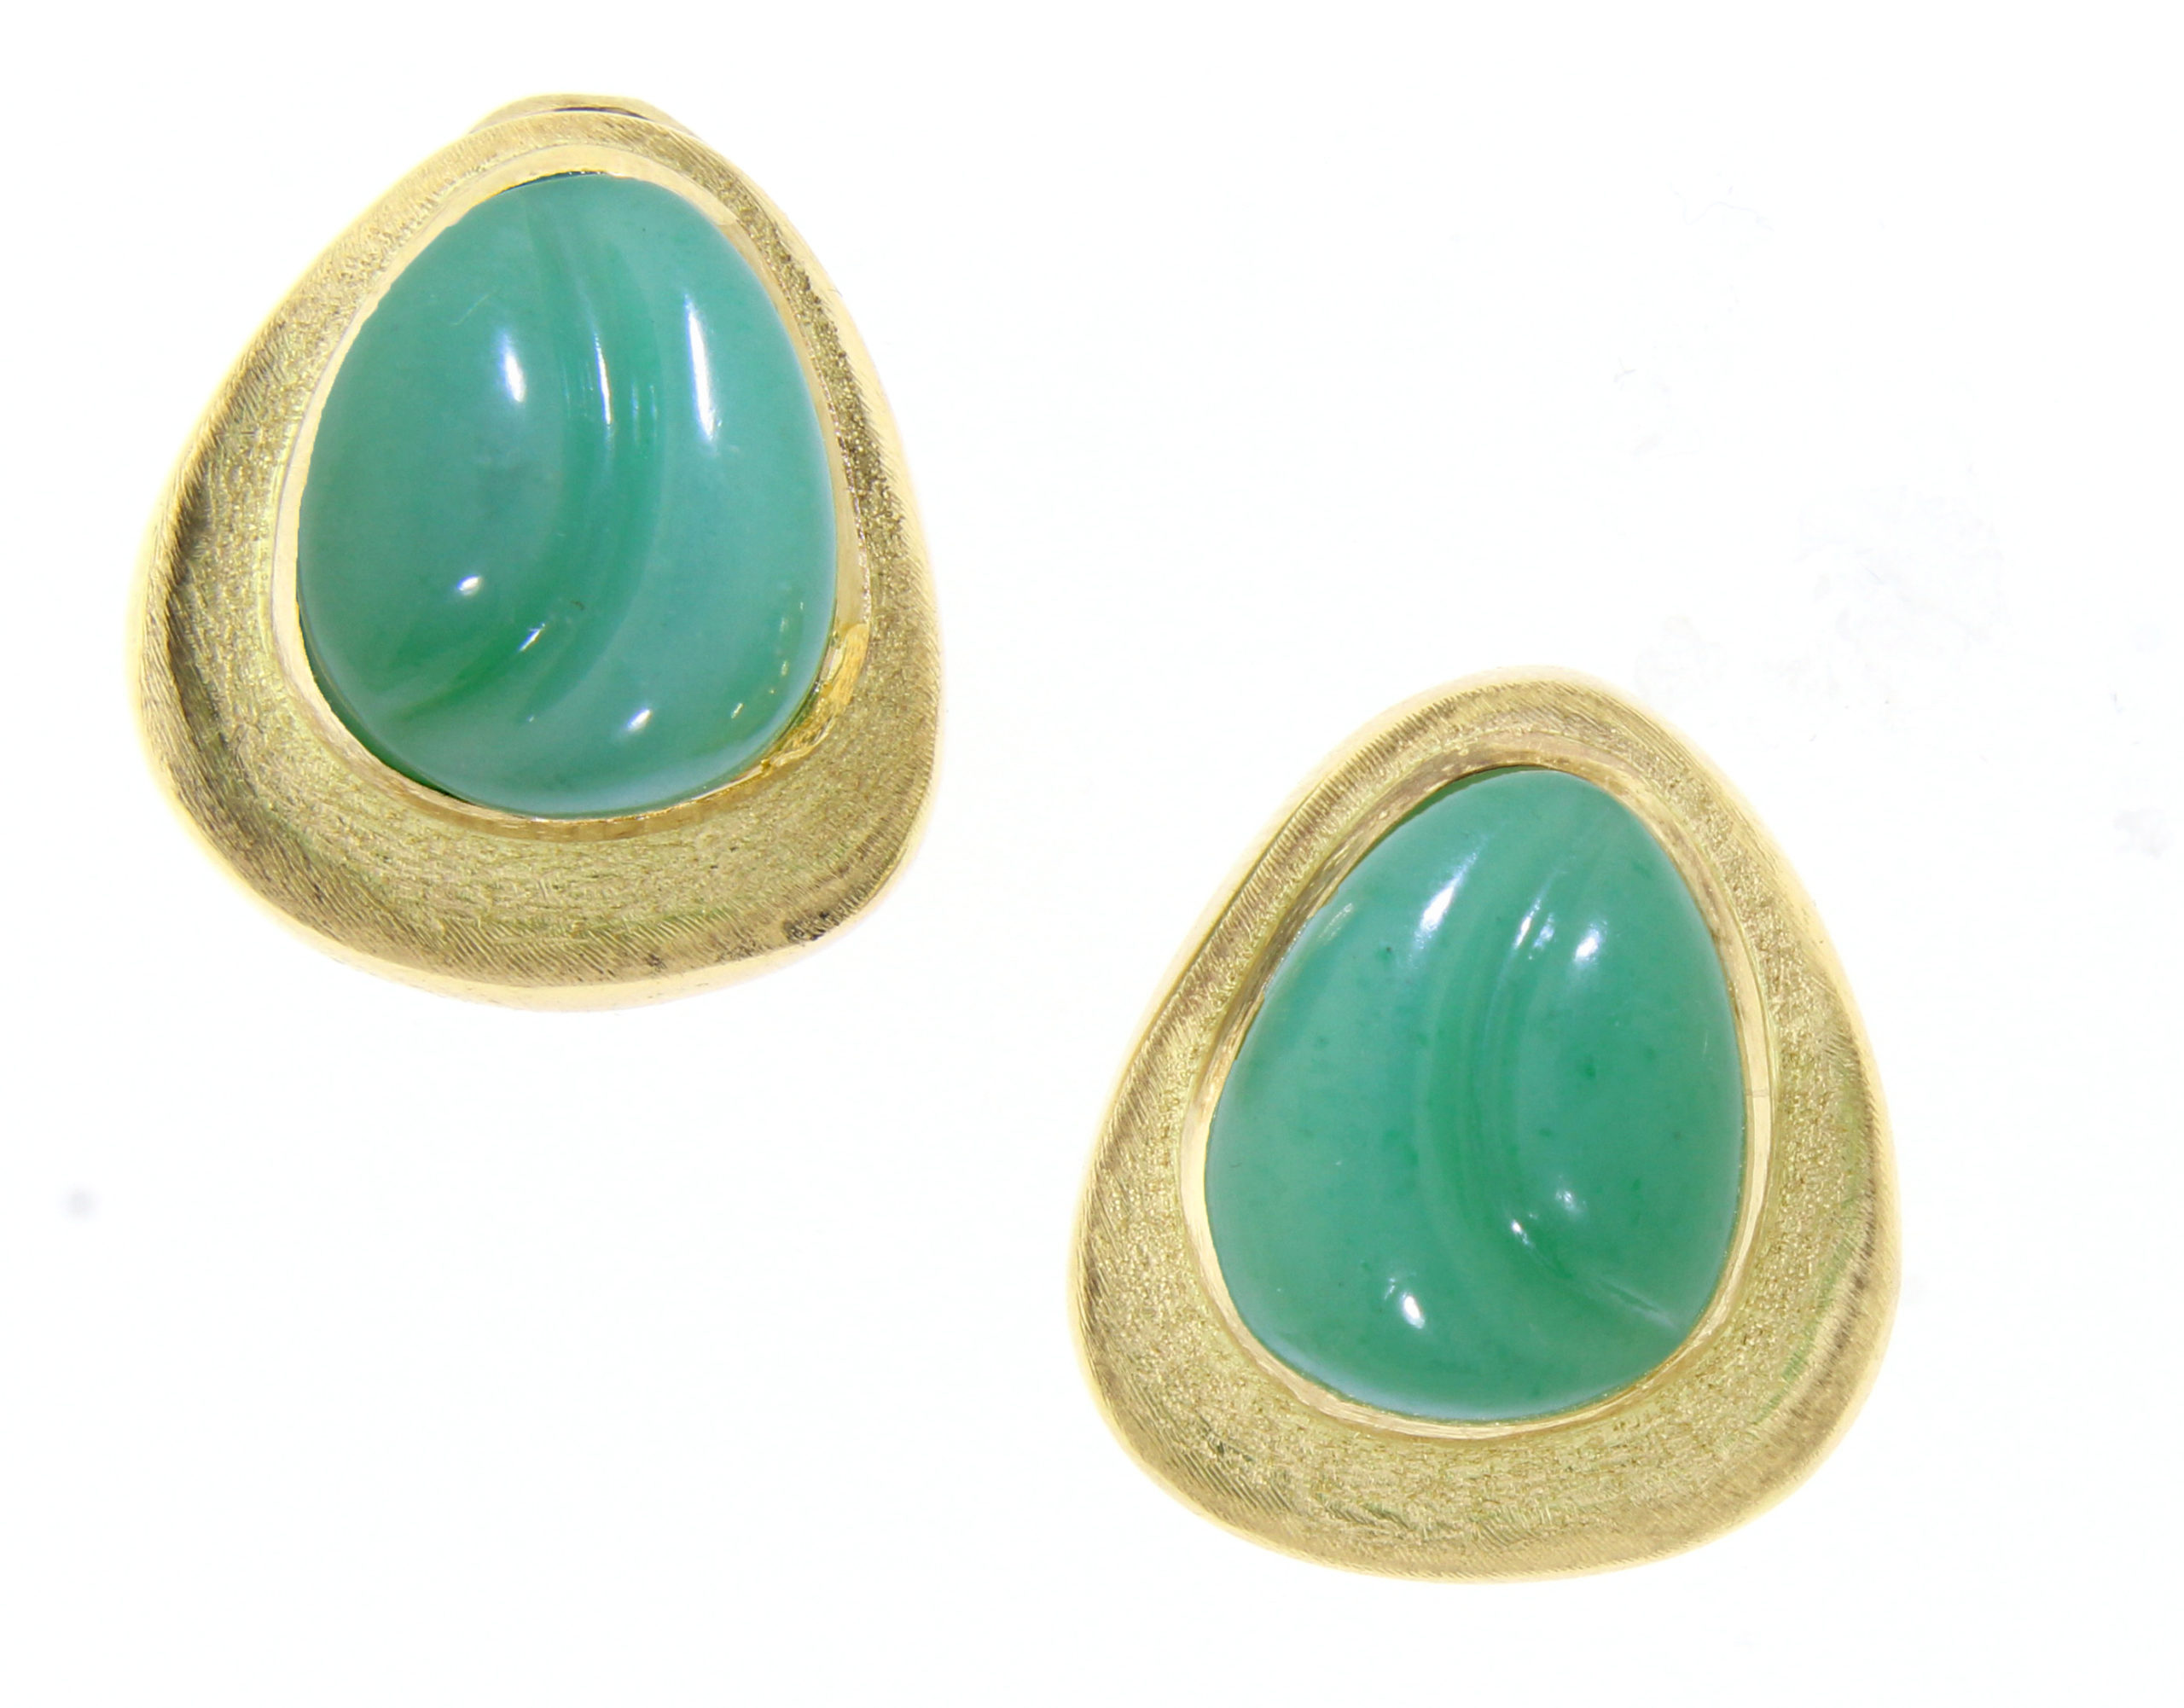 Roberto Burle Marx s Chrysoprase Forma Livre Earrings at pampillonia